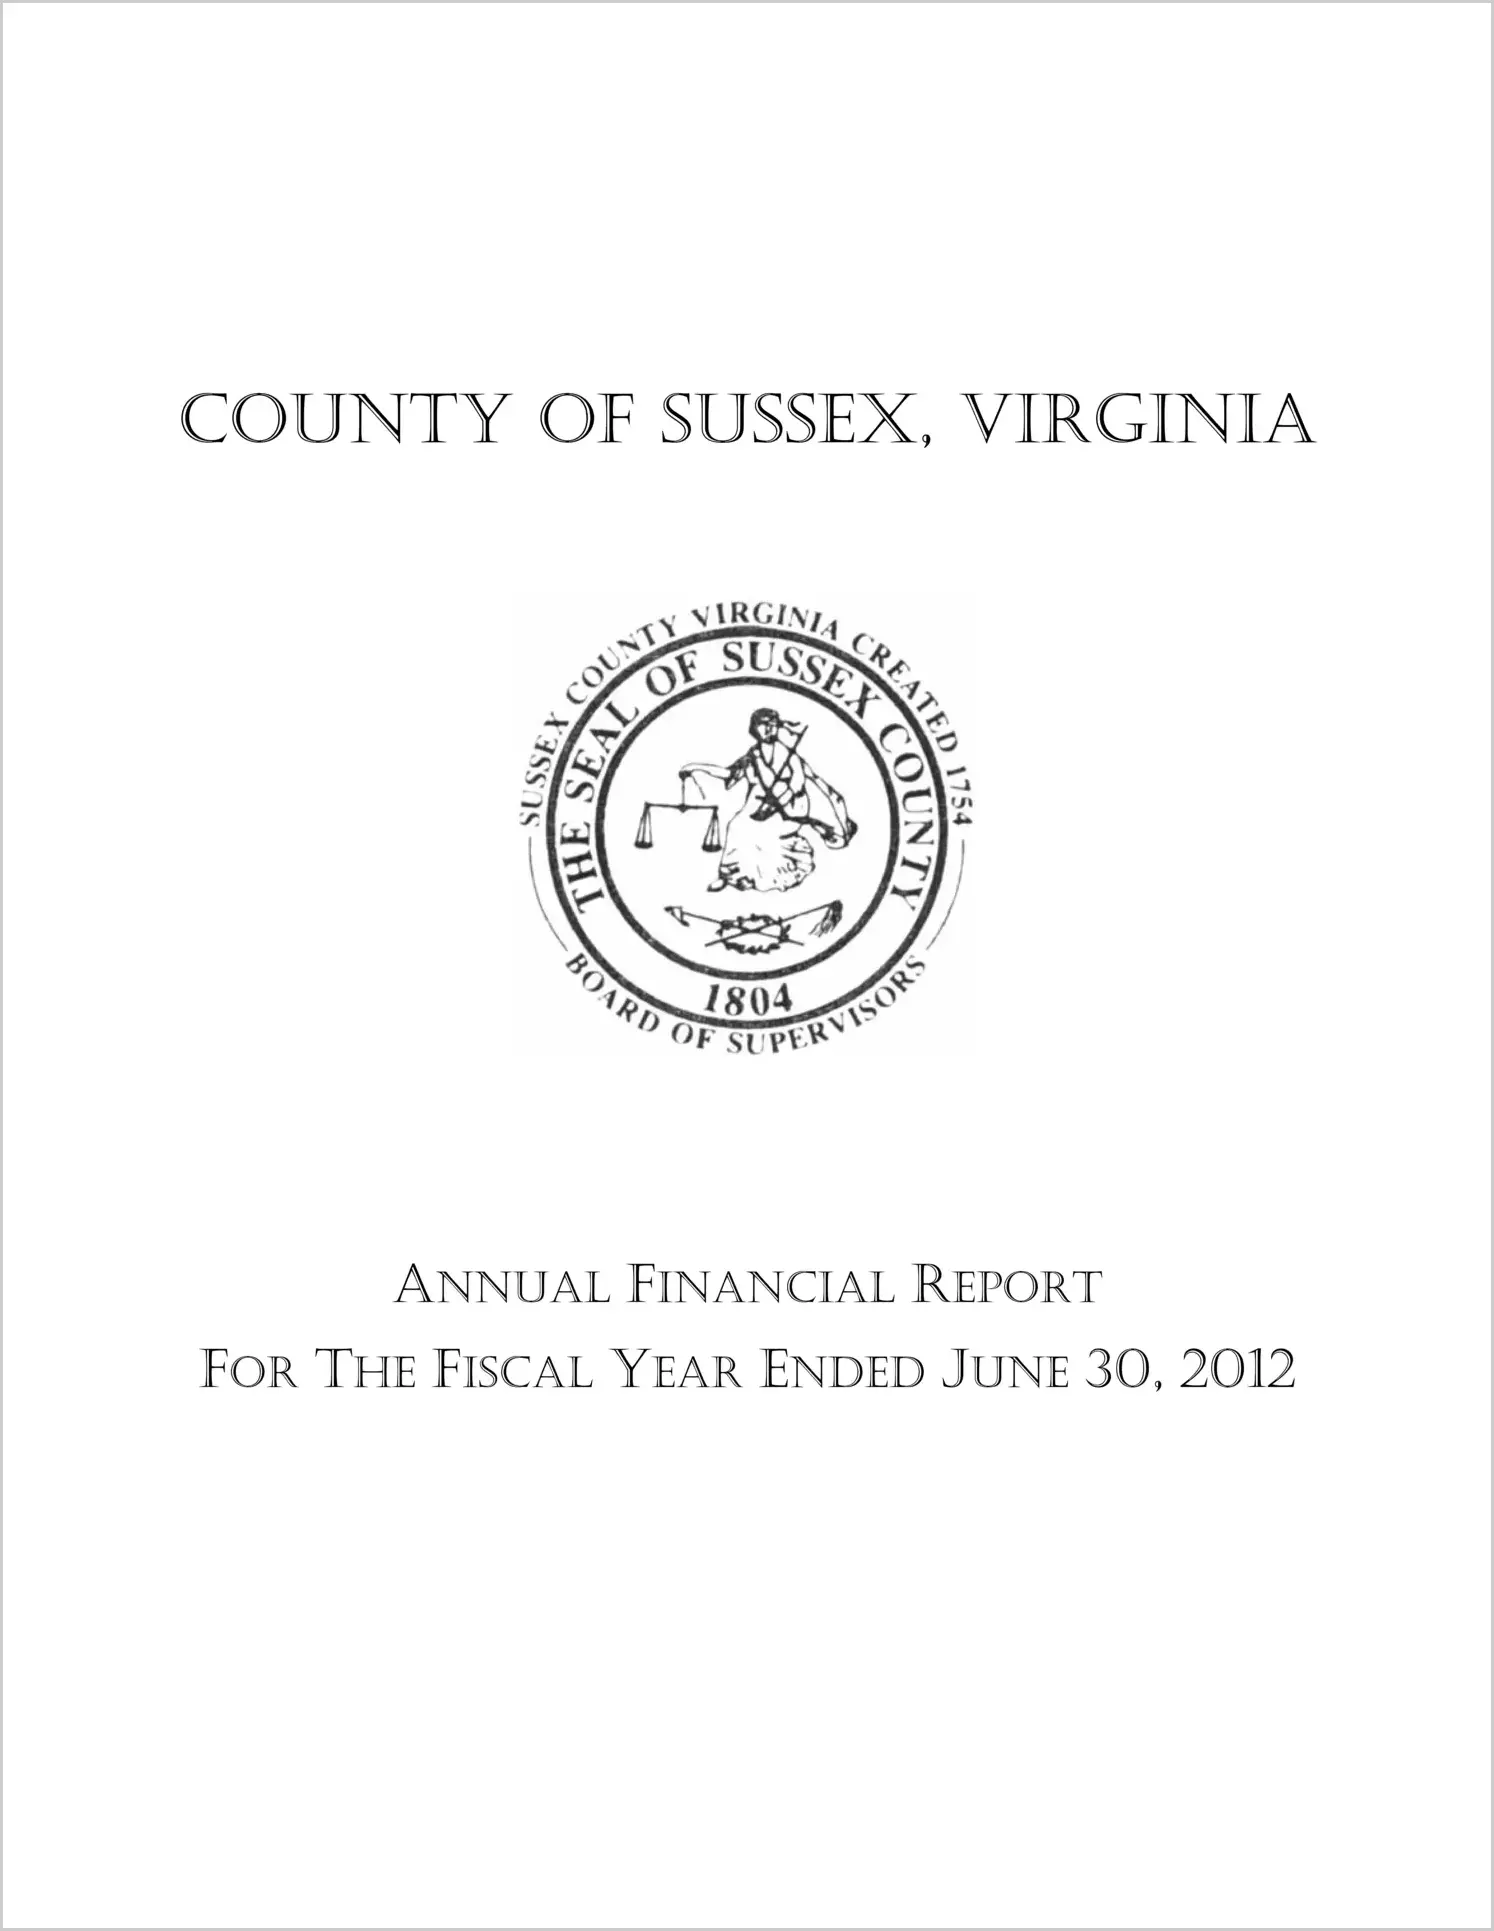 2012 Annual Financial Report for County of Sussex